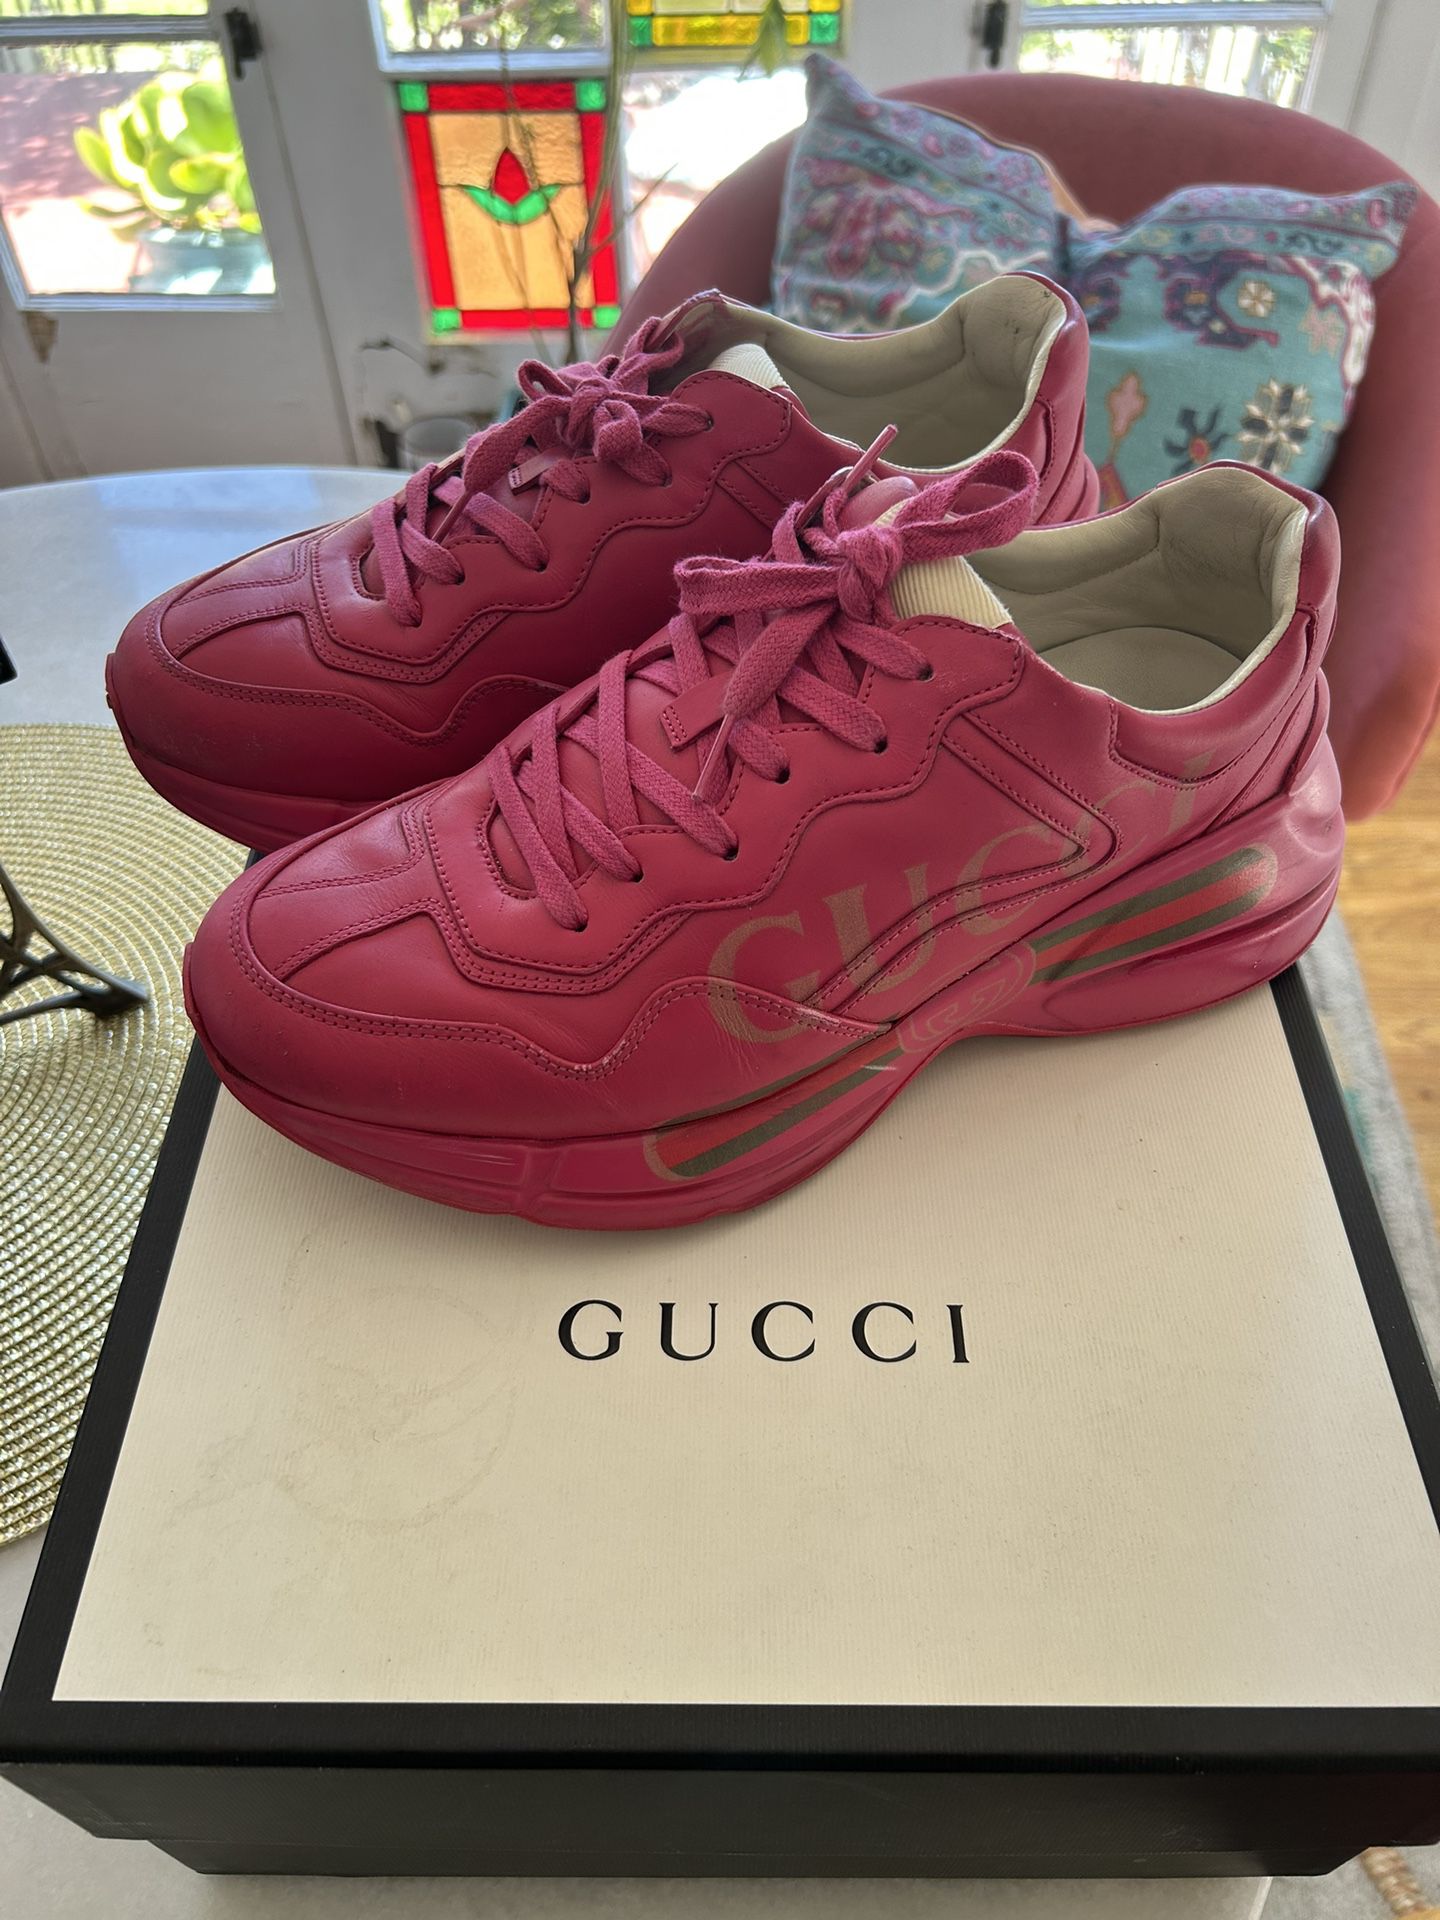 Authentic Gucci Shoes ( Men ) for in Burbank, - OfferUp